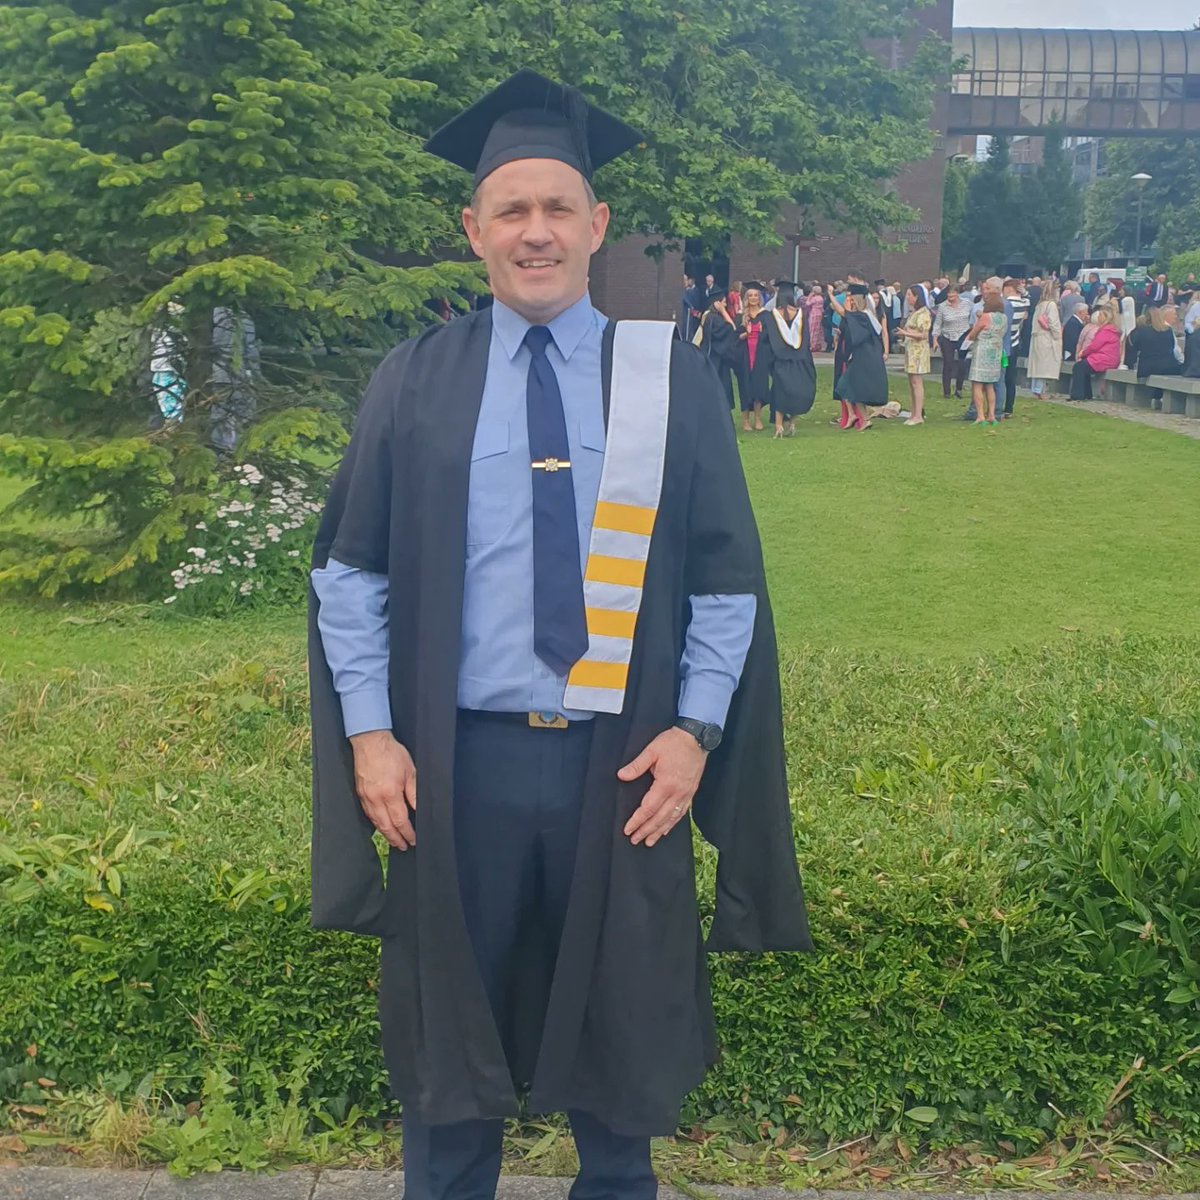 A fantastic day today graduating in @HR_EDIUL having put in a tough year of academic work. Thankful of the support of my family and friends to help me achieve the results I got.     A great day and feeling proud. #universityoflimerick   #ulgraduation